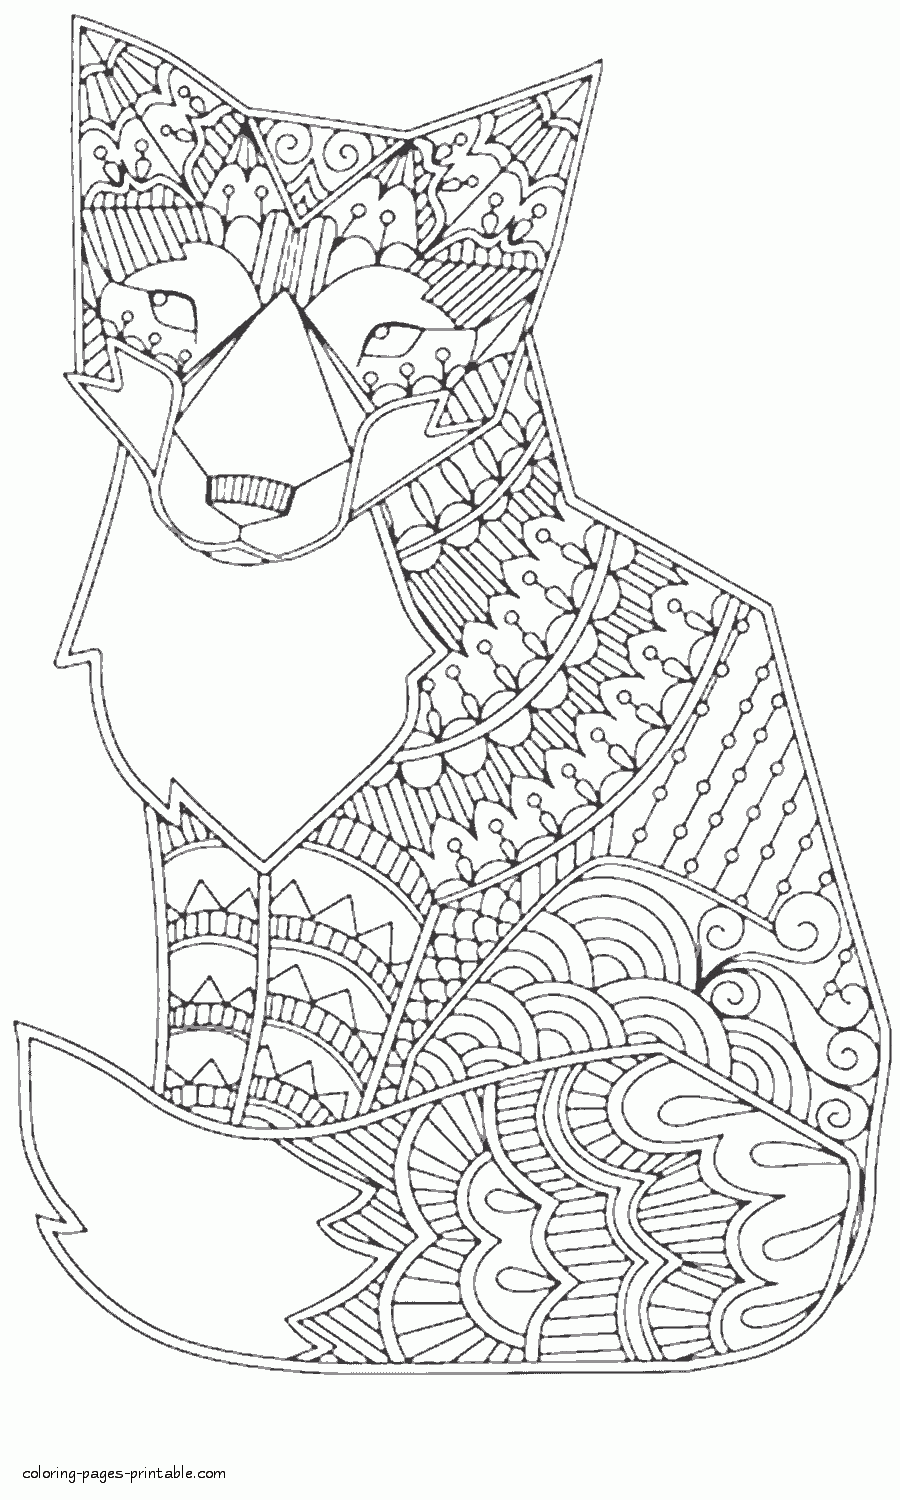 Complicated Animal Coloring Pages    COLORING PAGES PRINTABLE.COM